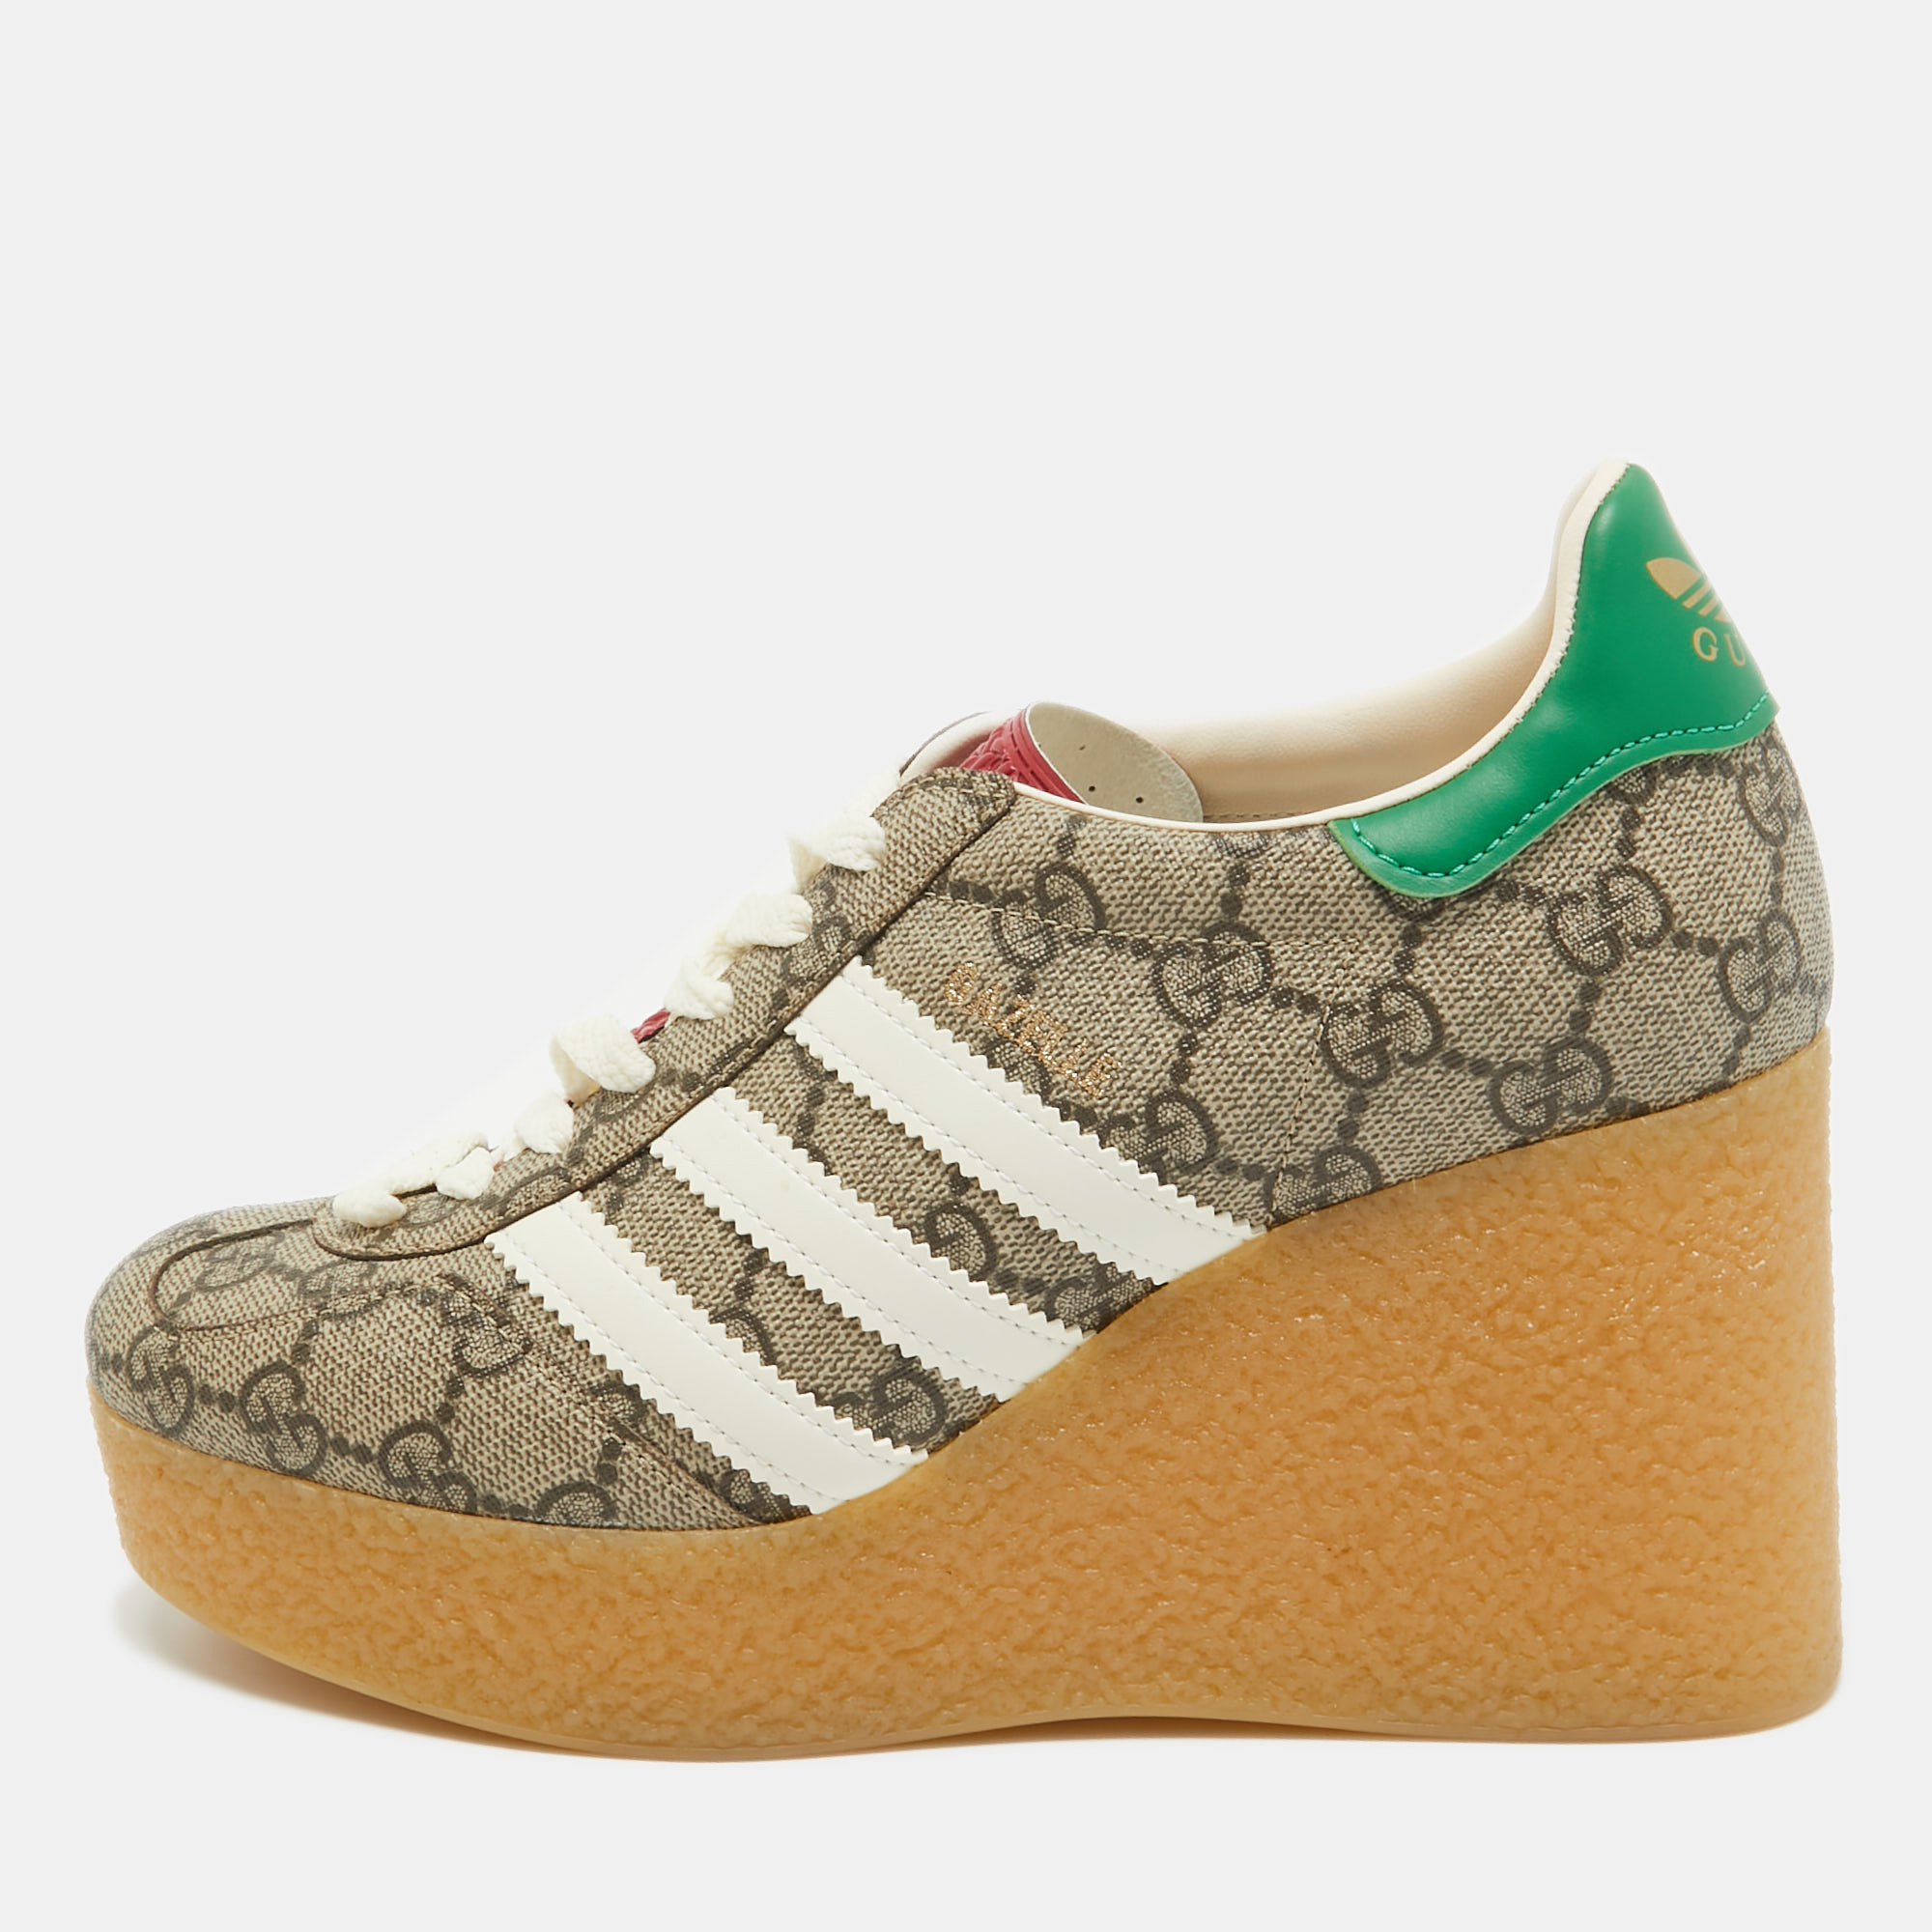 

Gucci x Adidas Beige GG Supreme Canvas Gazelle Wedge Sneakers Size